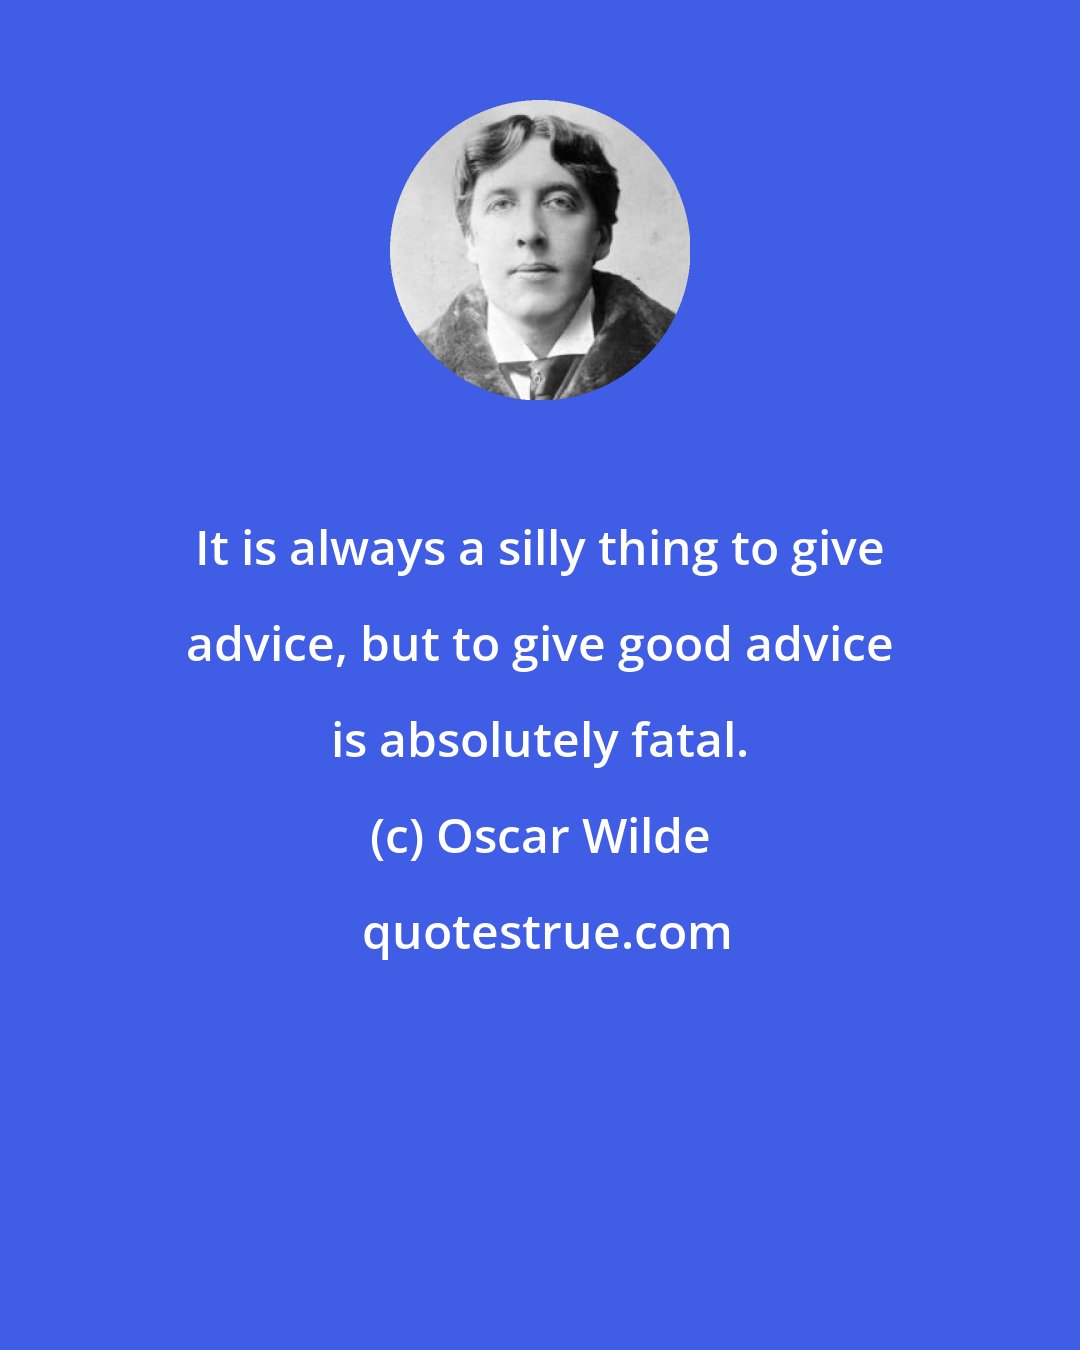 Oscar Wilde: It is always a silly thing to give advice, but to give good advice is absolutely fatal.